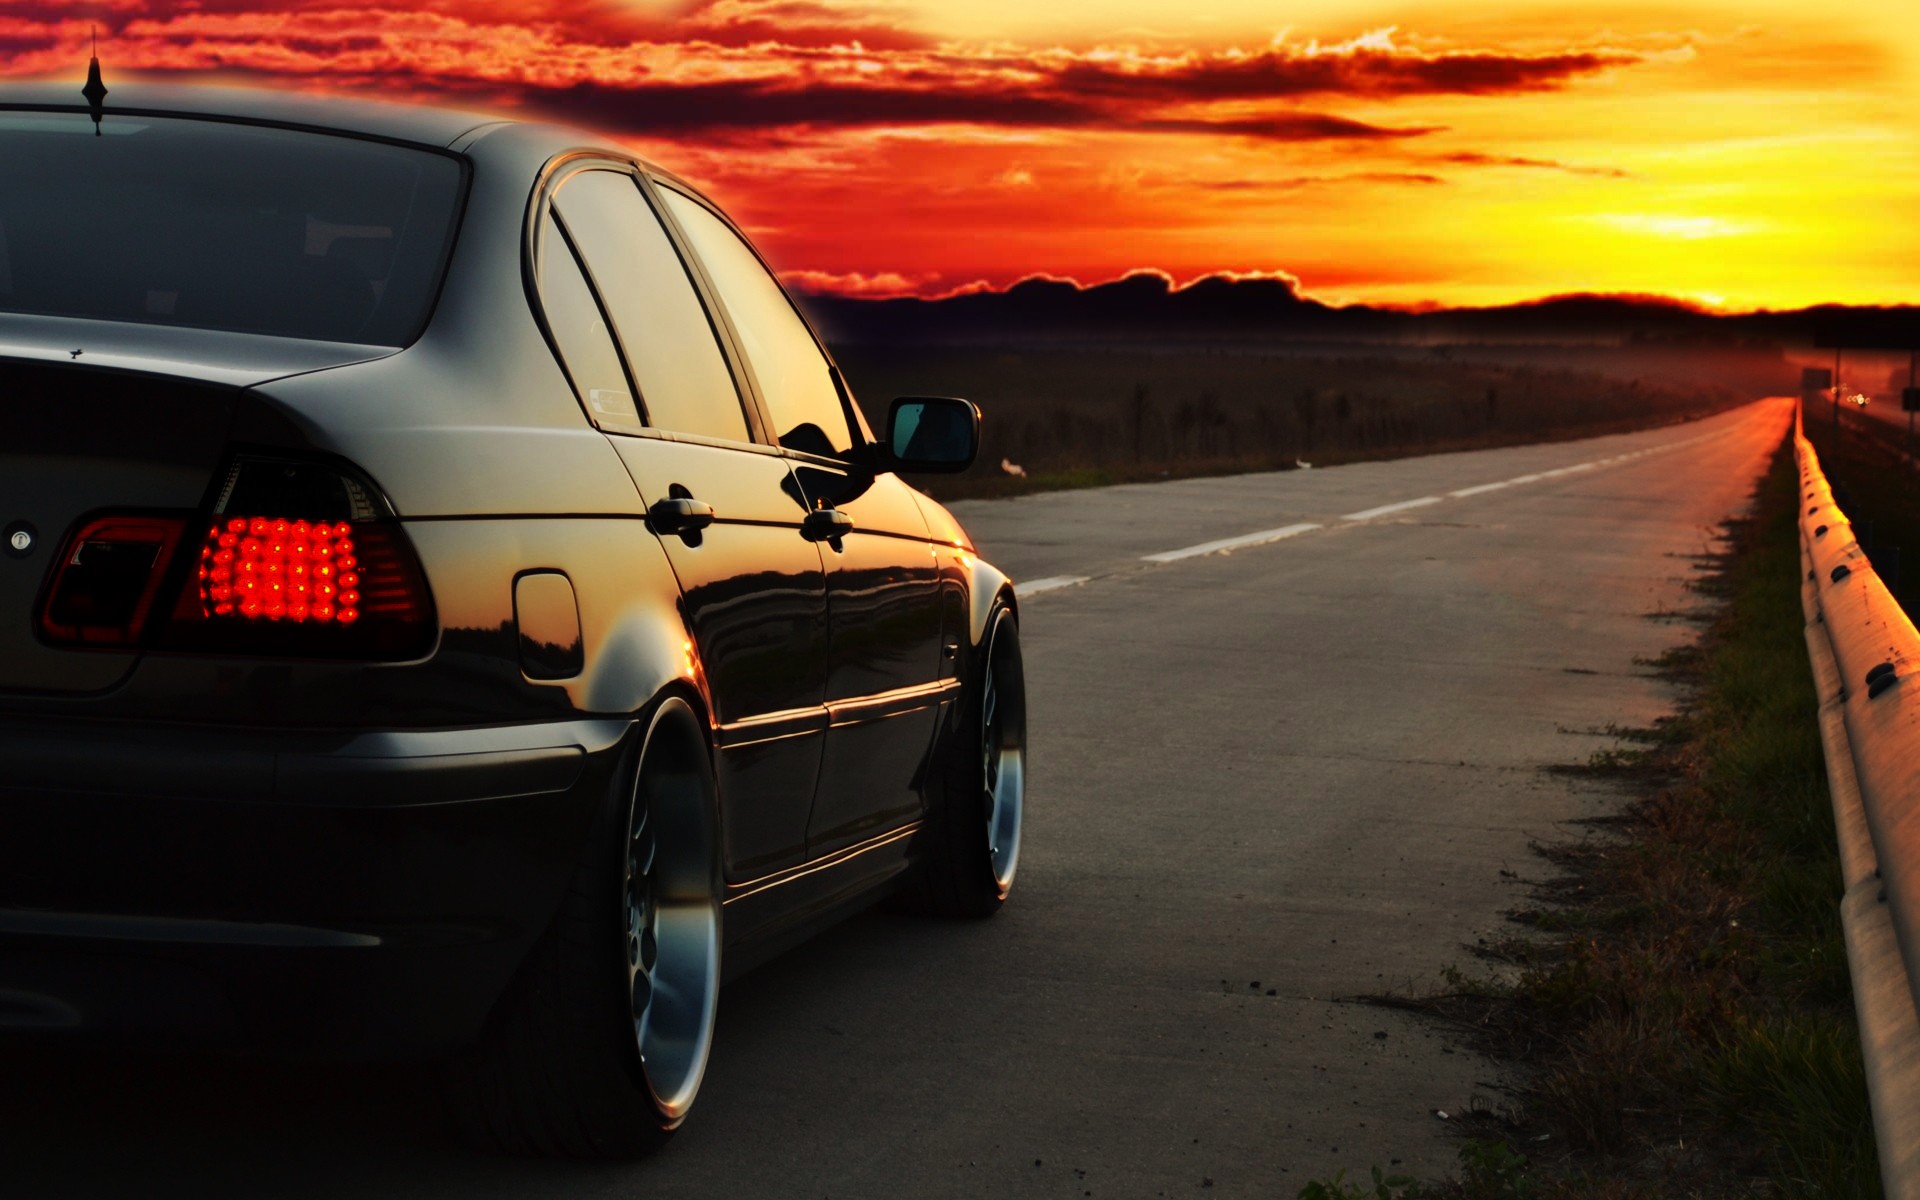 BMW E46, Photoshopped, Sunset, Road, Driving, Car Wallpaper